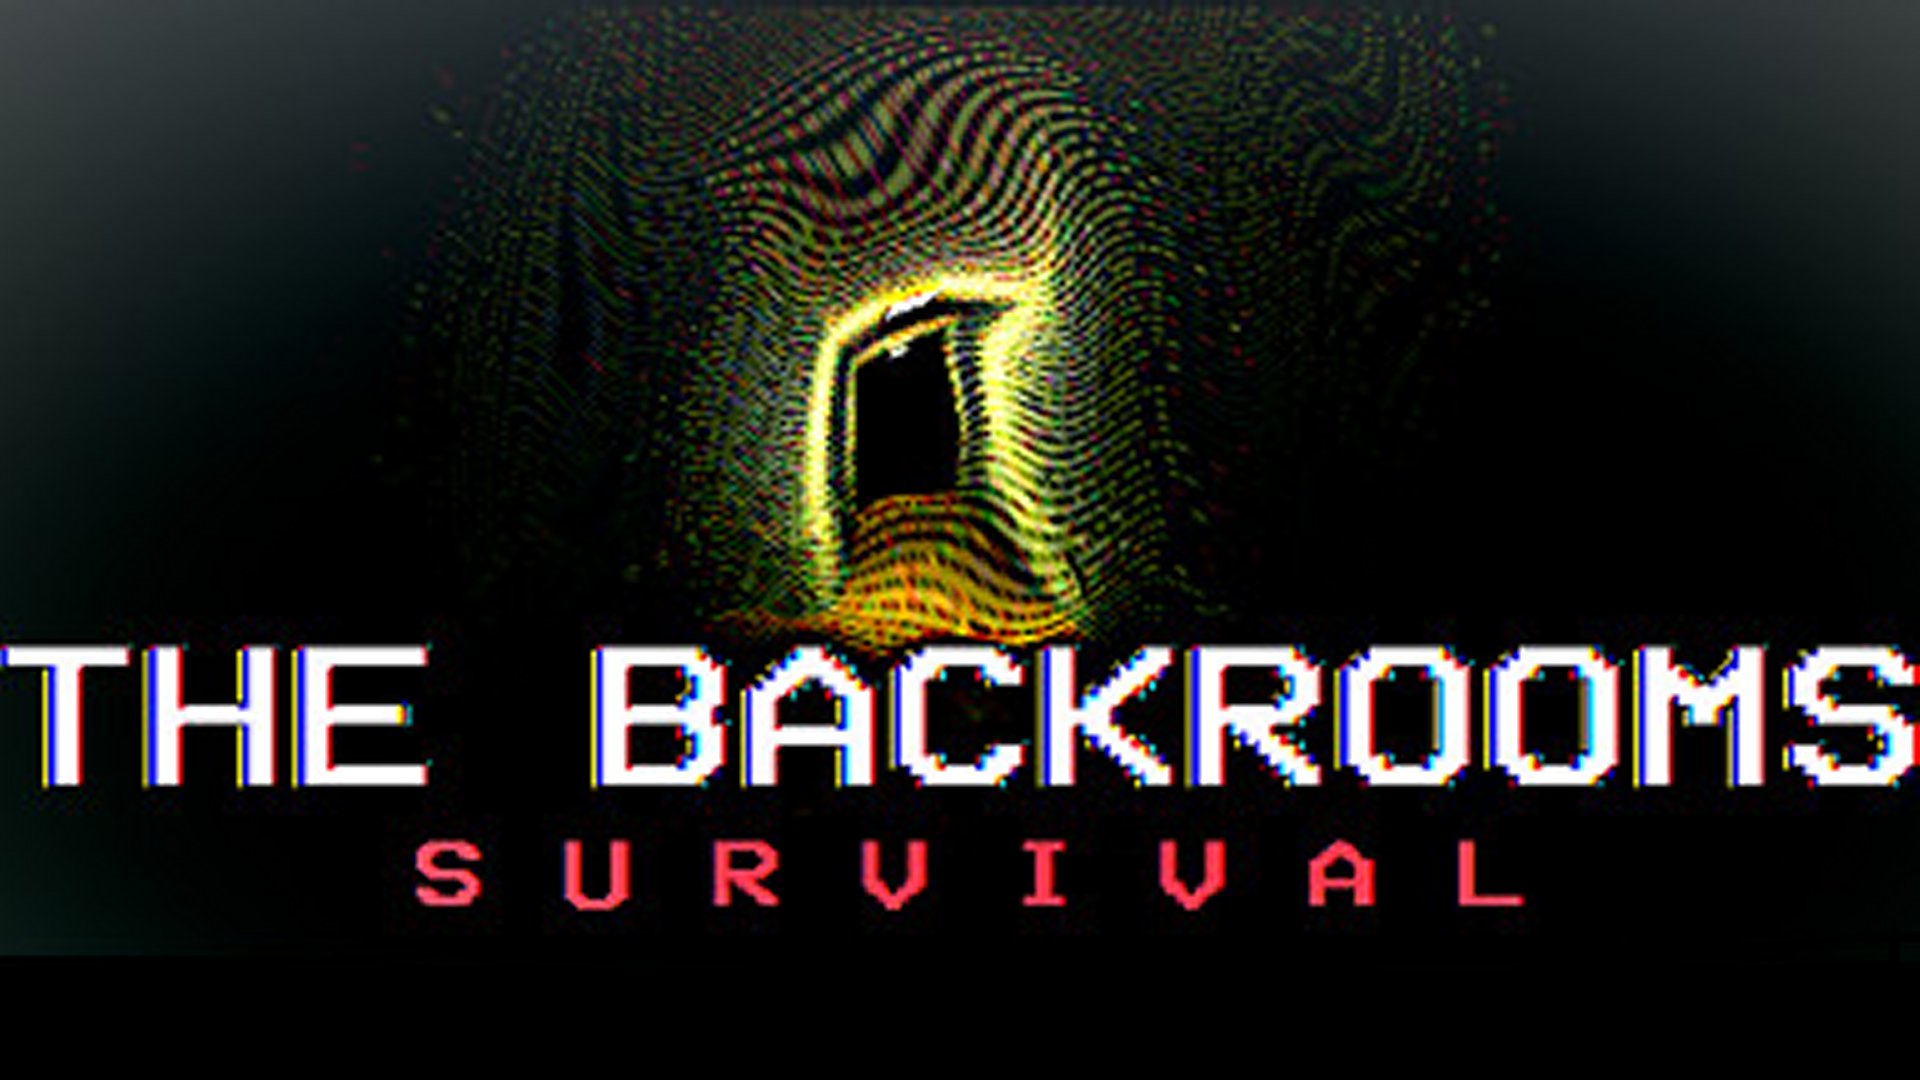 The Backrooms Game Online Play For Free